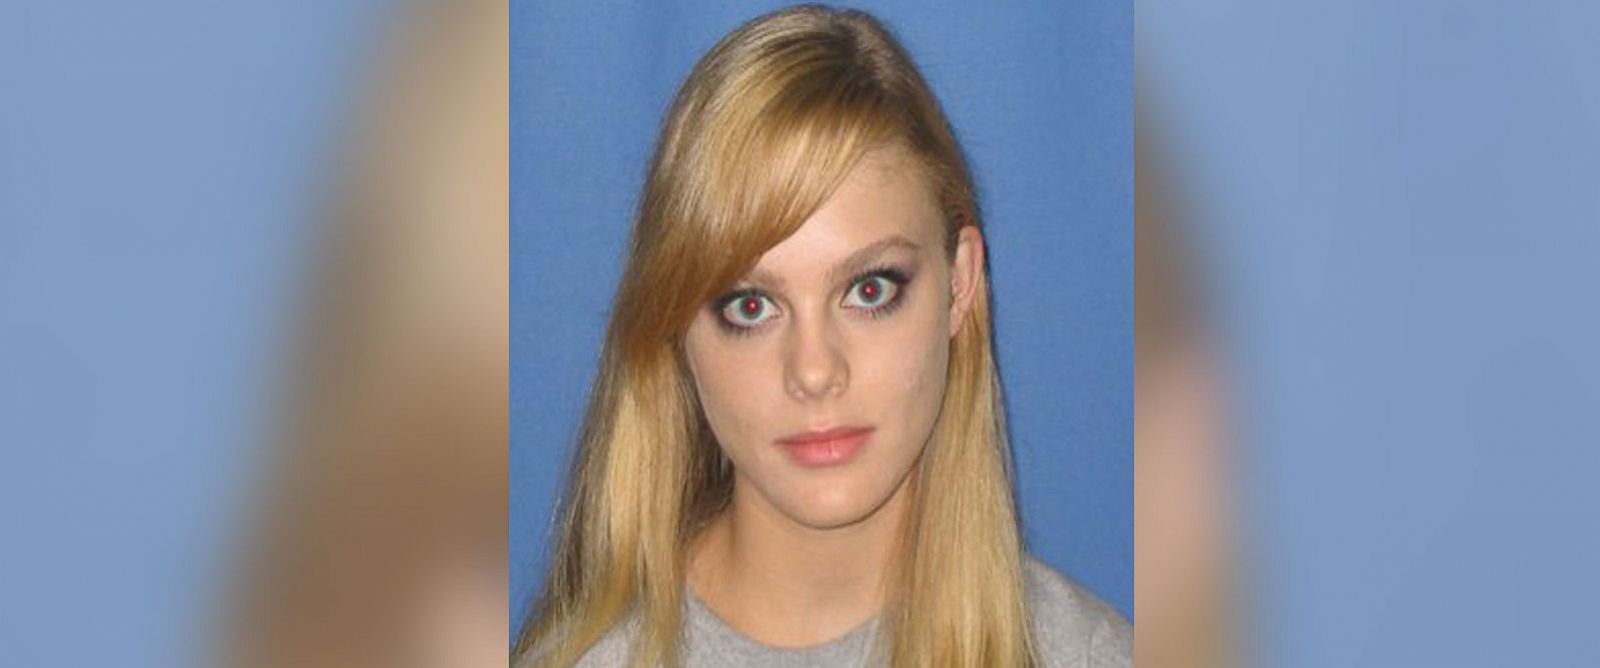 Suspect In Hannah Graham Disappearance Tied To 2009 Murder